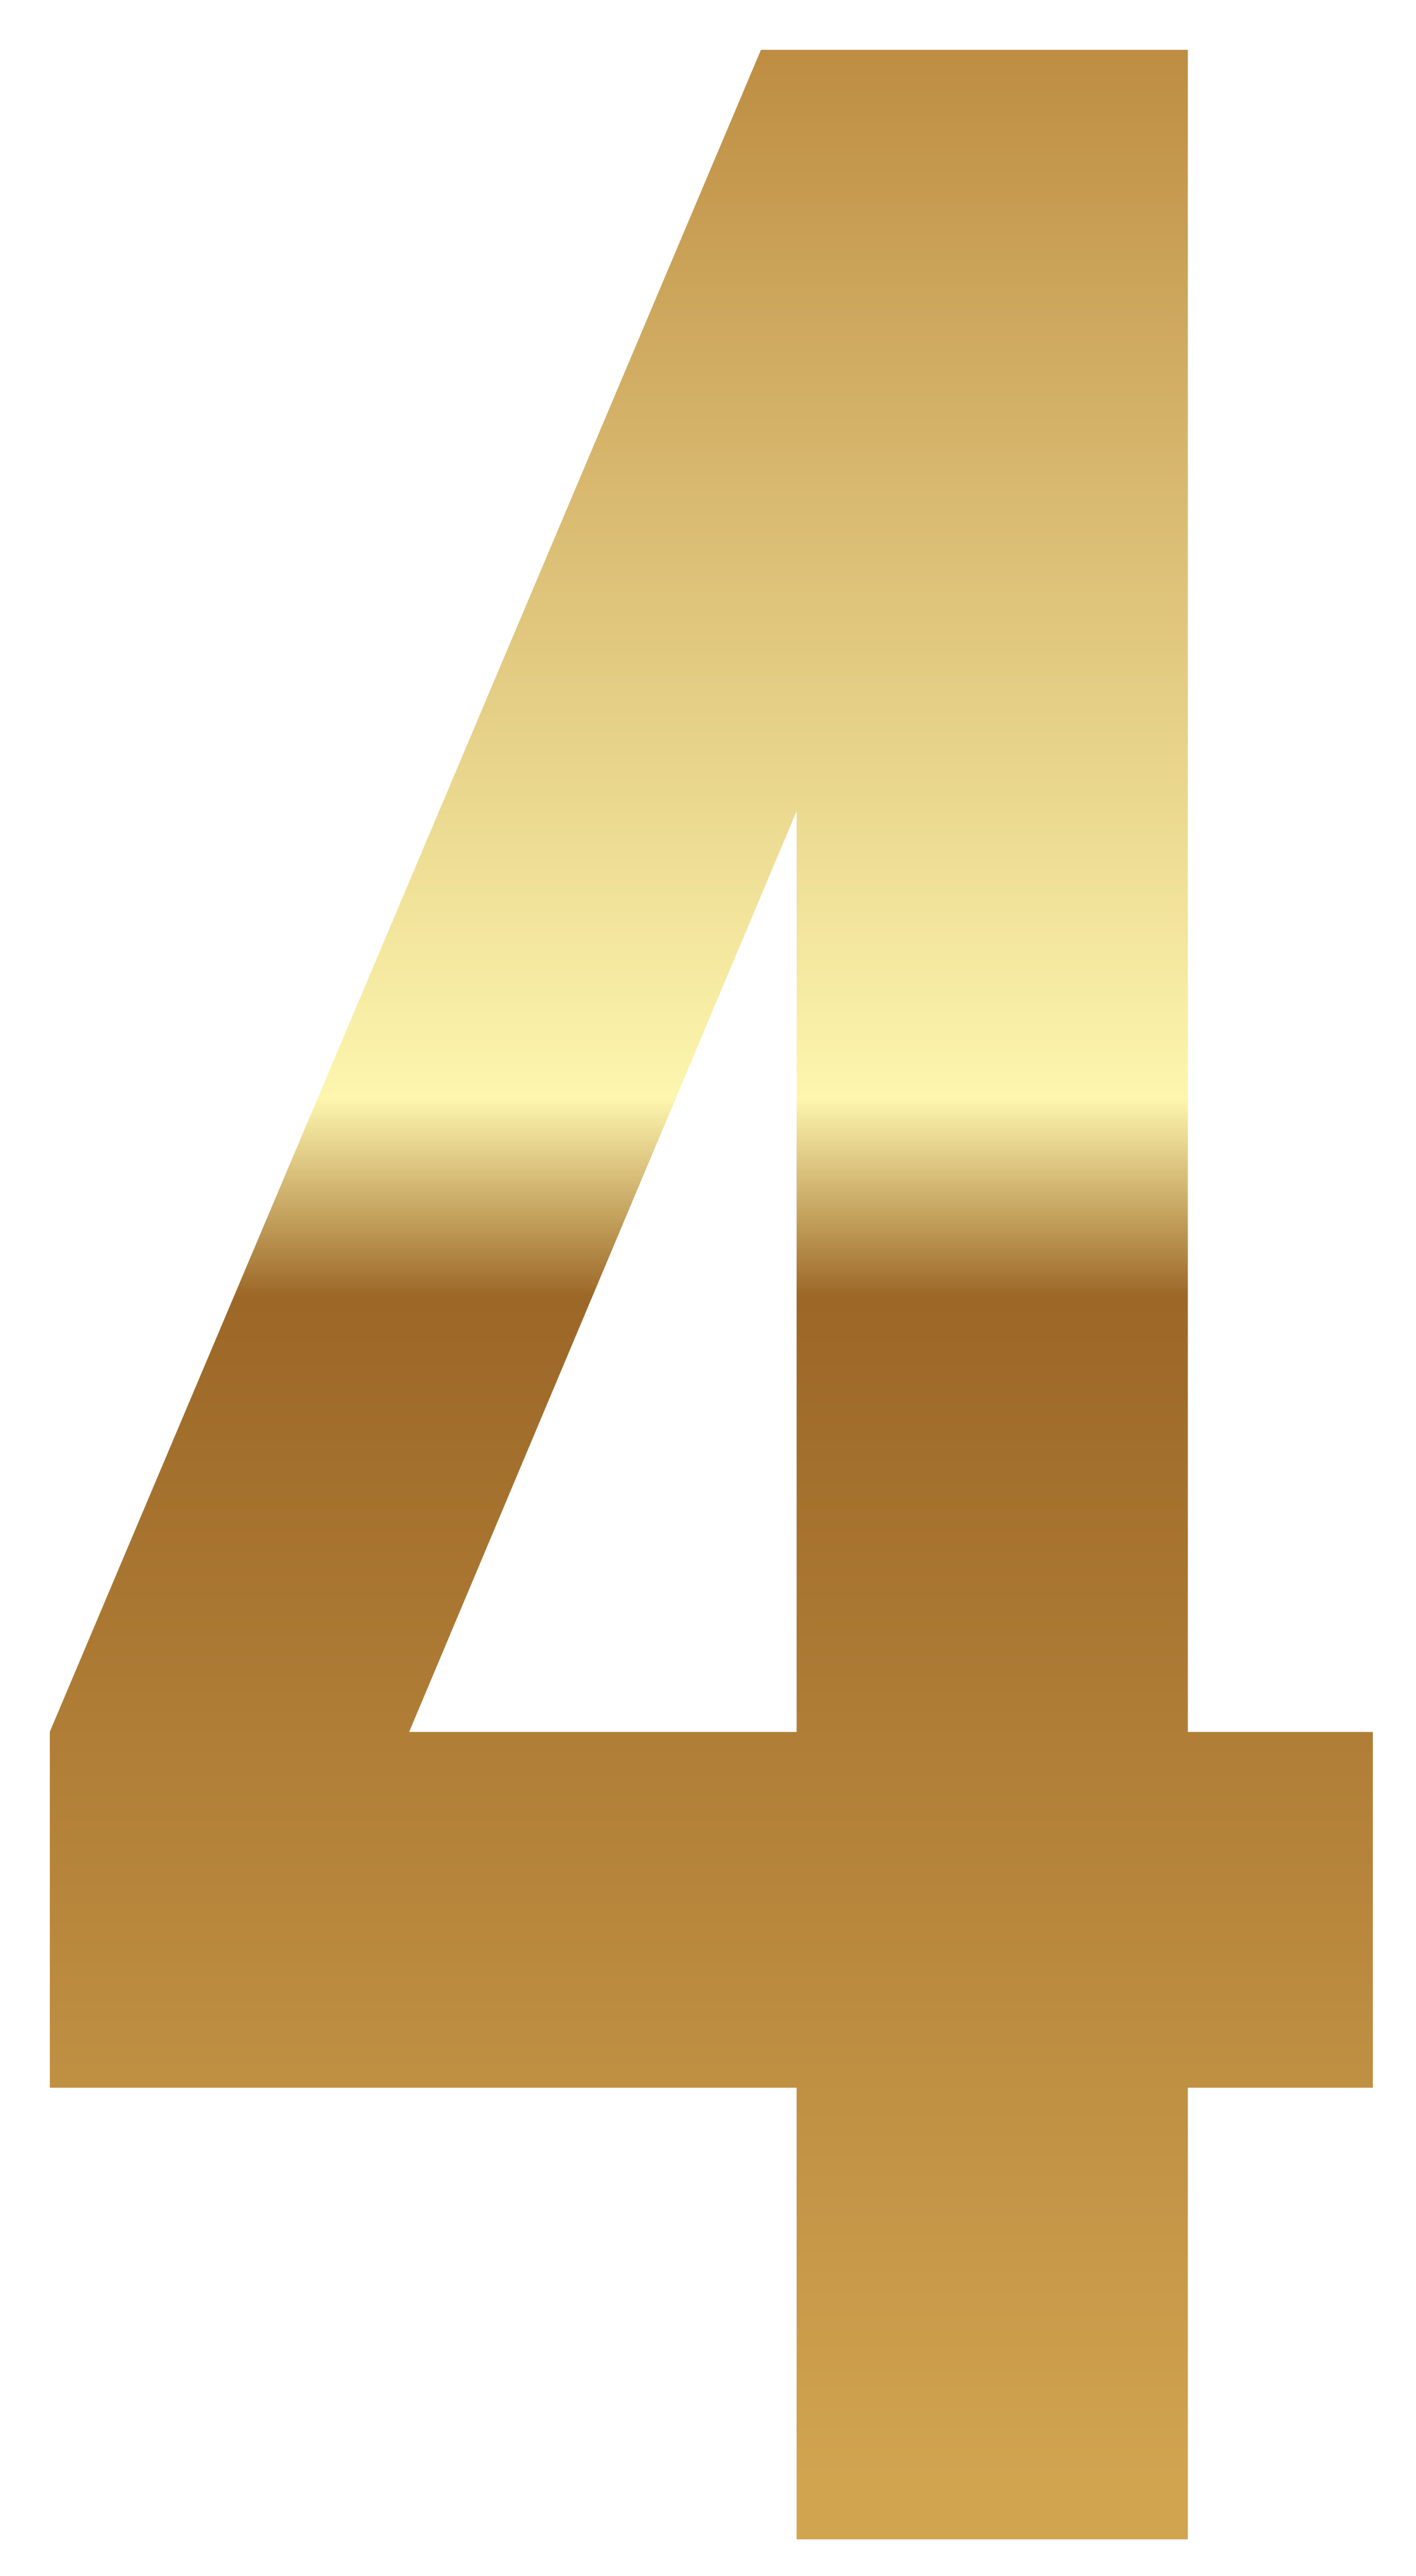 Golden four png image. Number 2 clipart yellow